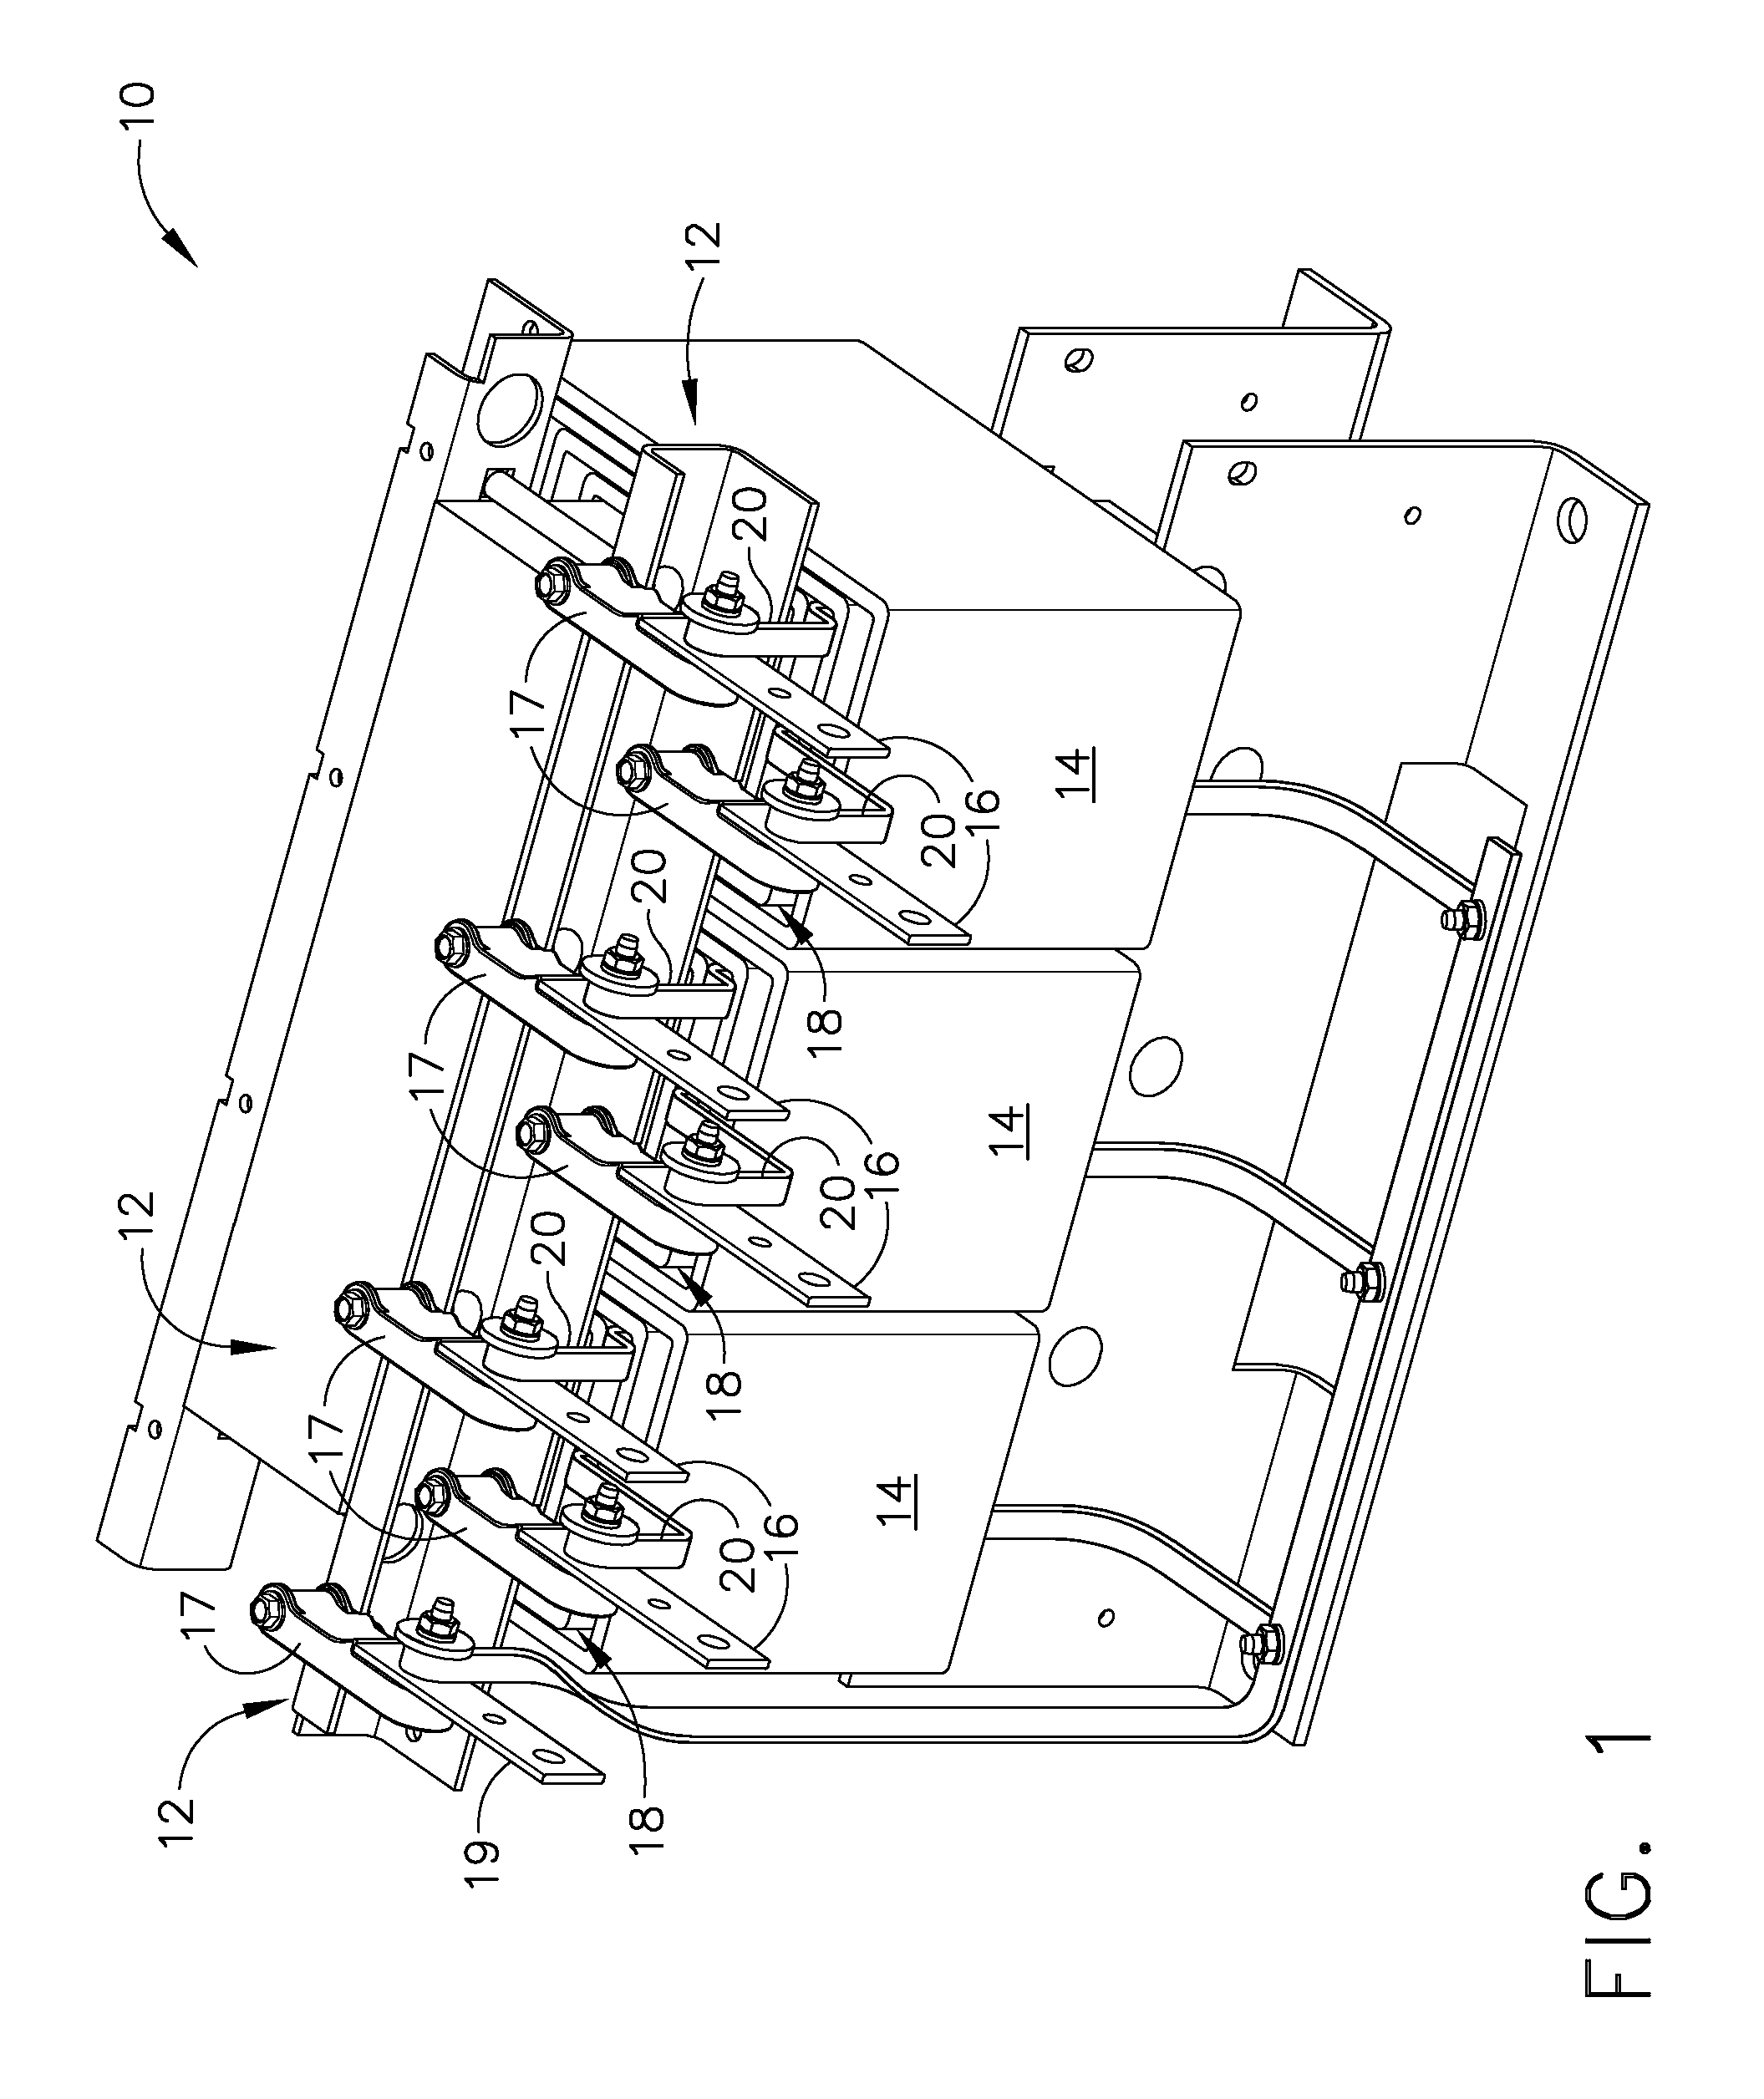 Transformer and method of assembly